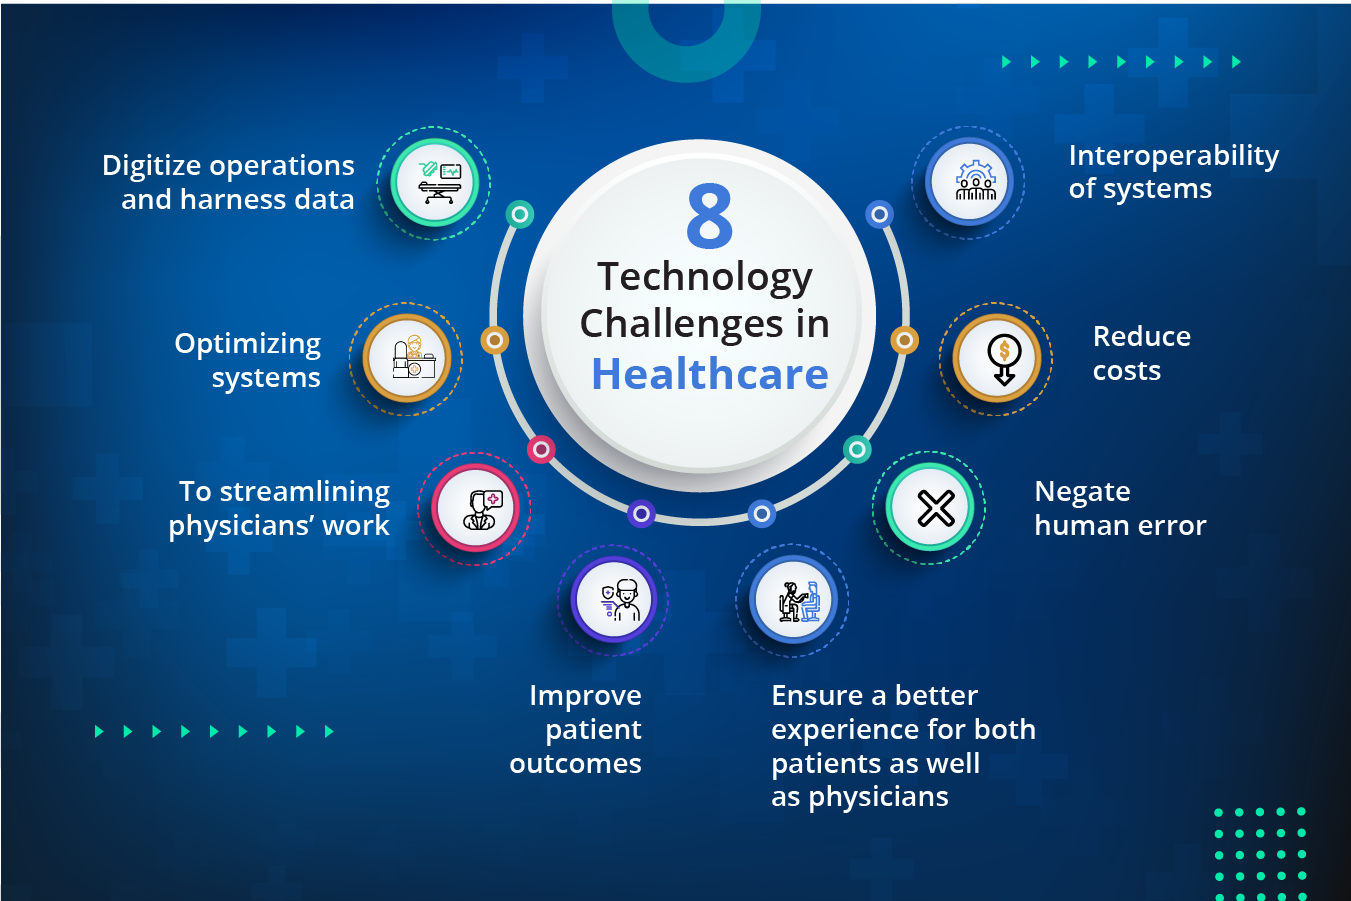 8 Technology Challenges in Healthcare